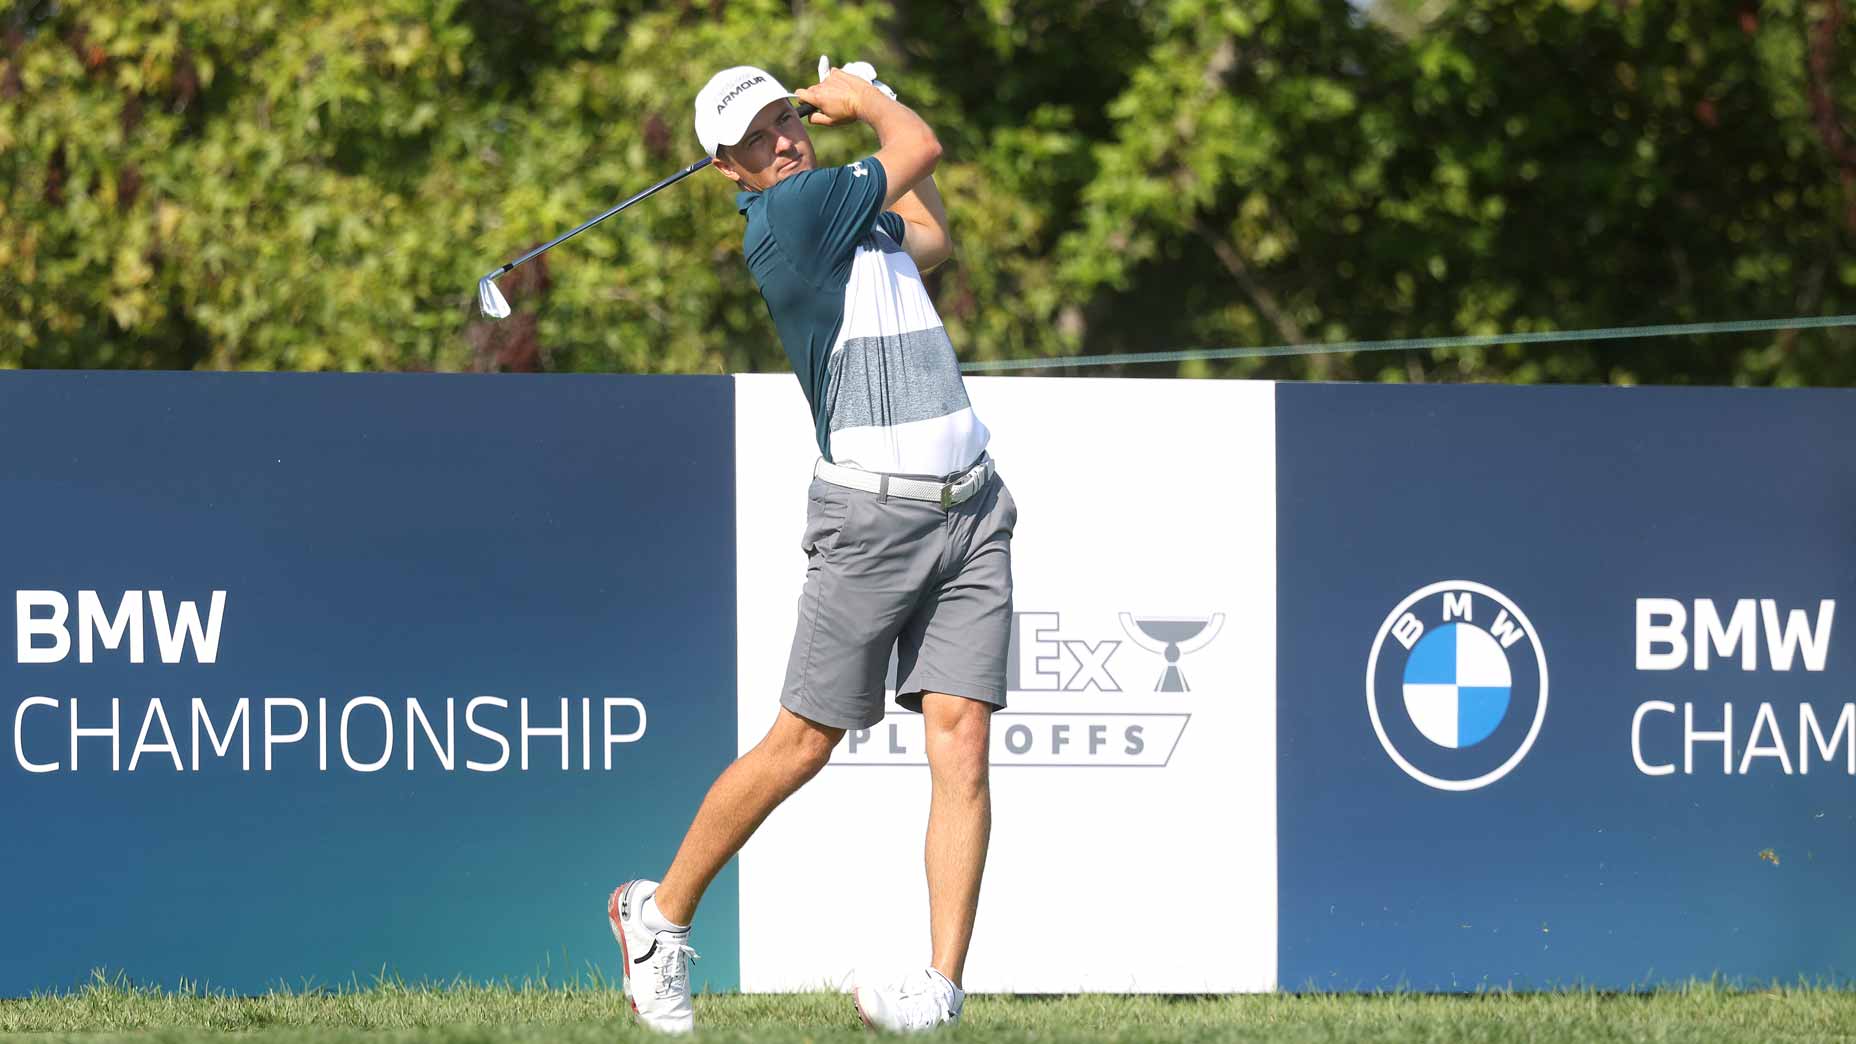 2021 Bmw Championship Live Coverage How To Watch Thursday